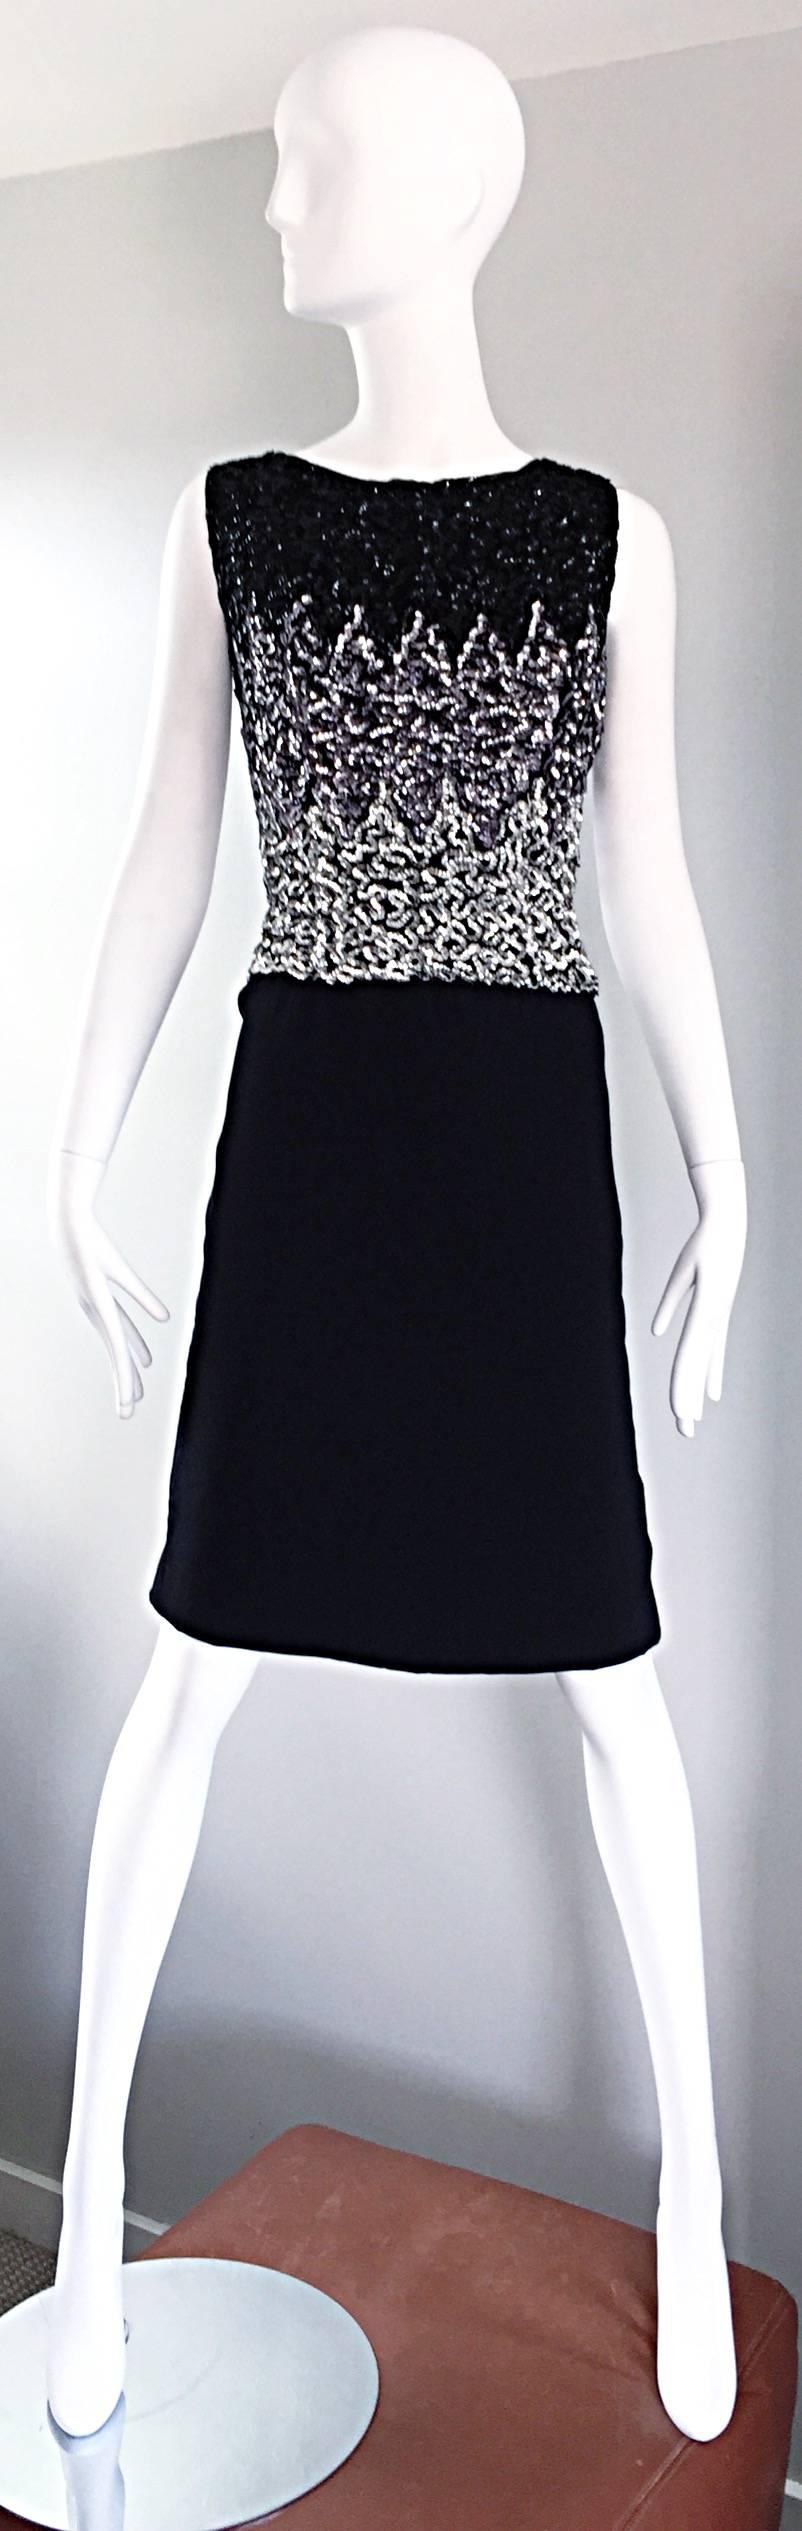 Beautiful Vintage 1950s Black and Silver Sequined Crepe 50s Wiggle Shift Dress  For Sale 3